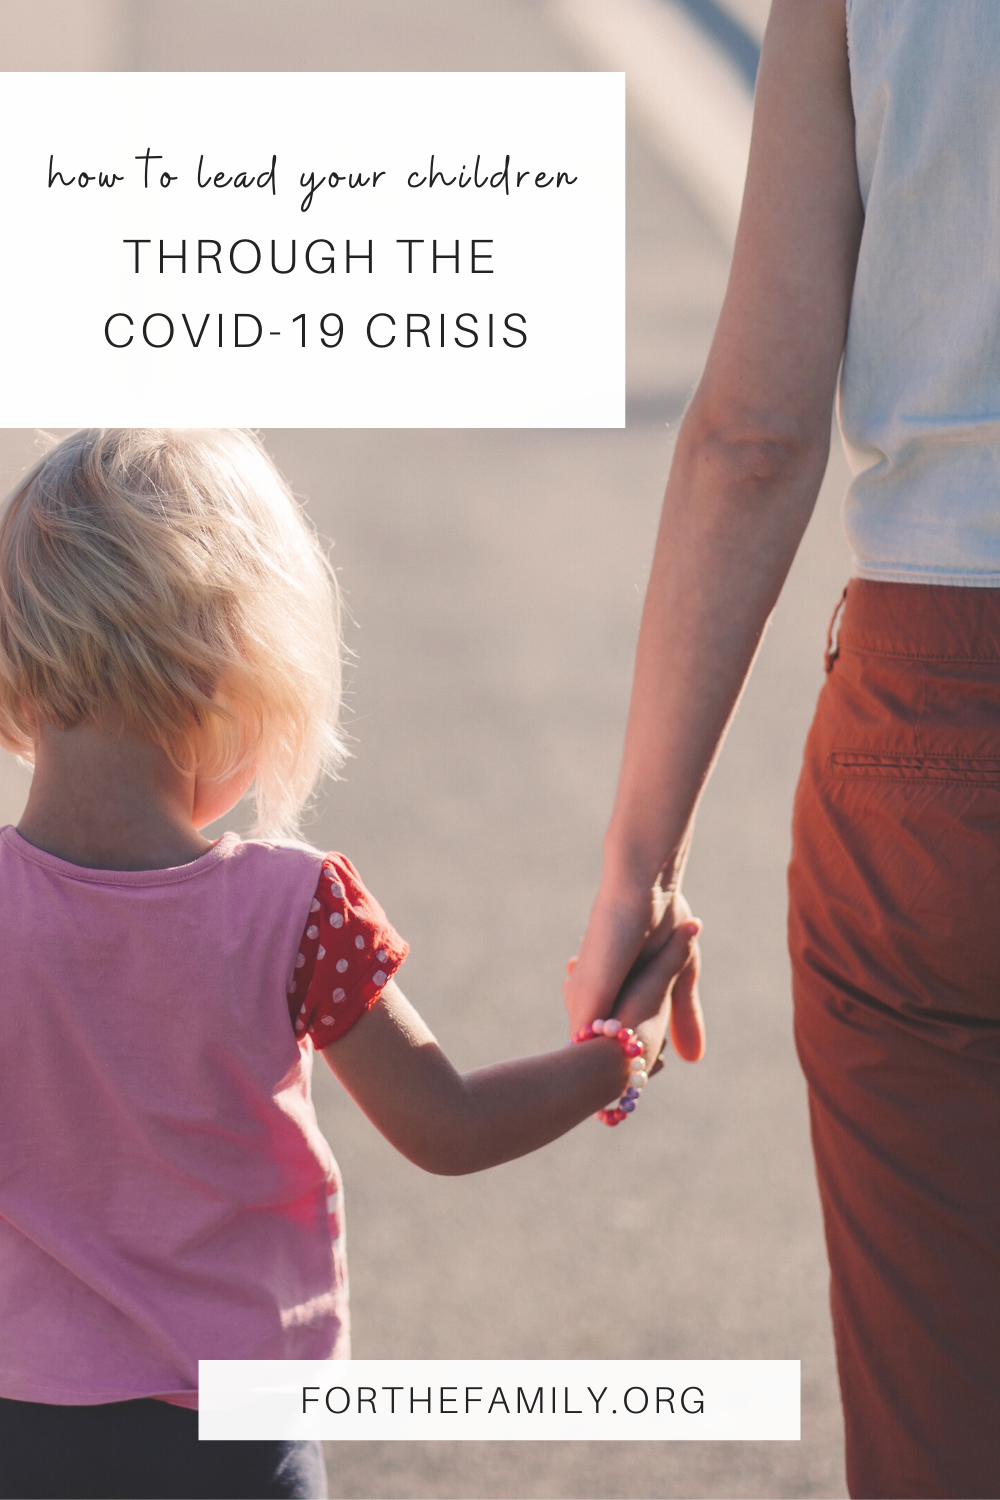 Now more than ever, as a parent we have an opportunity to lead our families wisely. Not out of fear or insecurity, but out of our God-given calling. A calling that is especially important during the circumstances we are facing due to the spread of COVID-19. Here are 5 tips to help you plus a step-by-step PDF guide